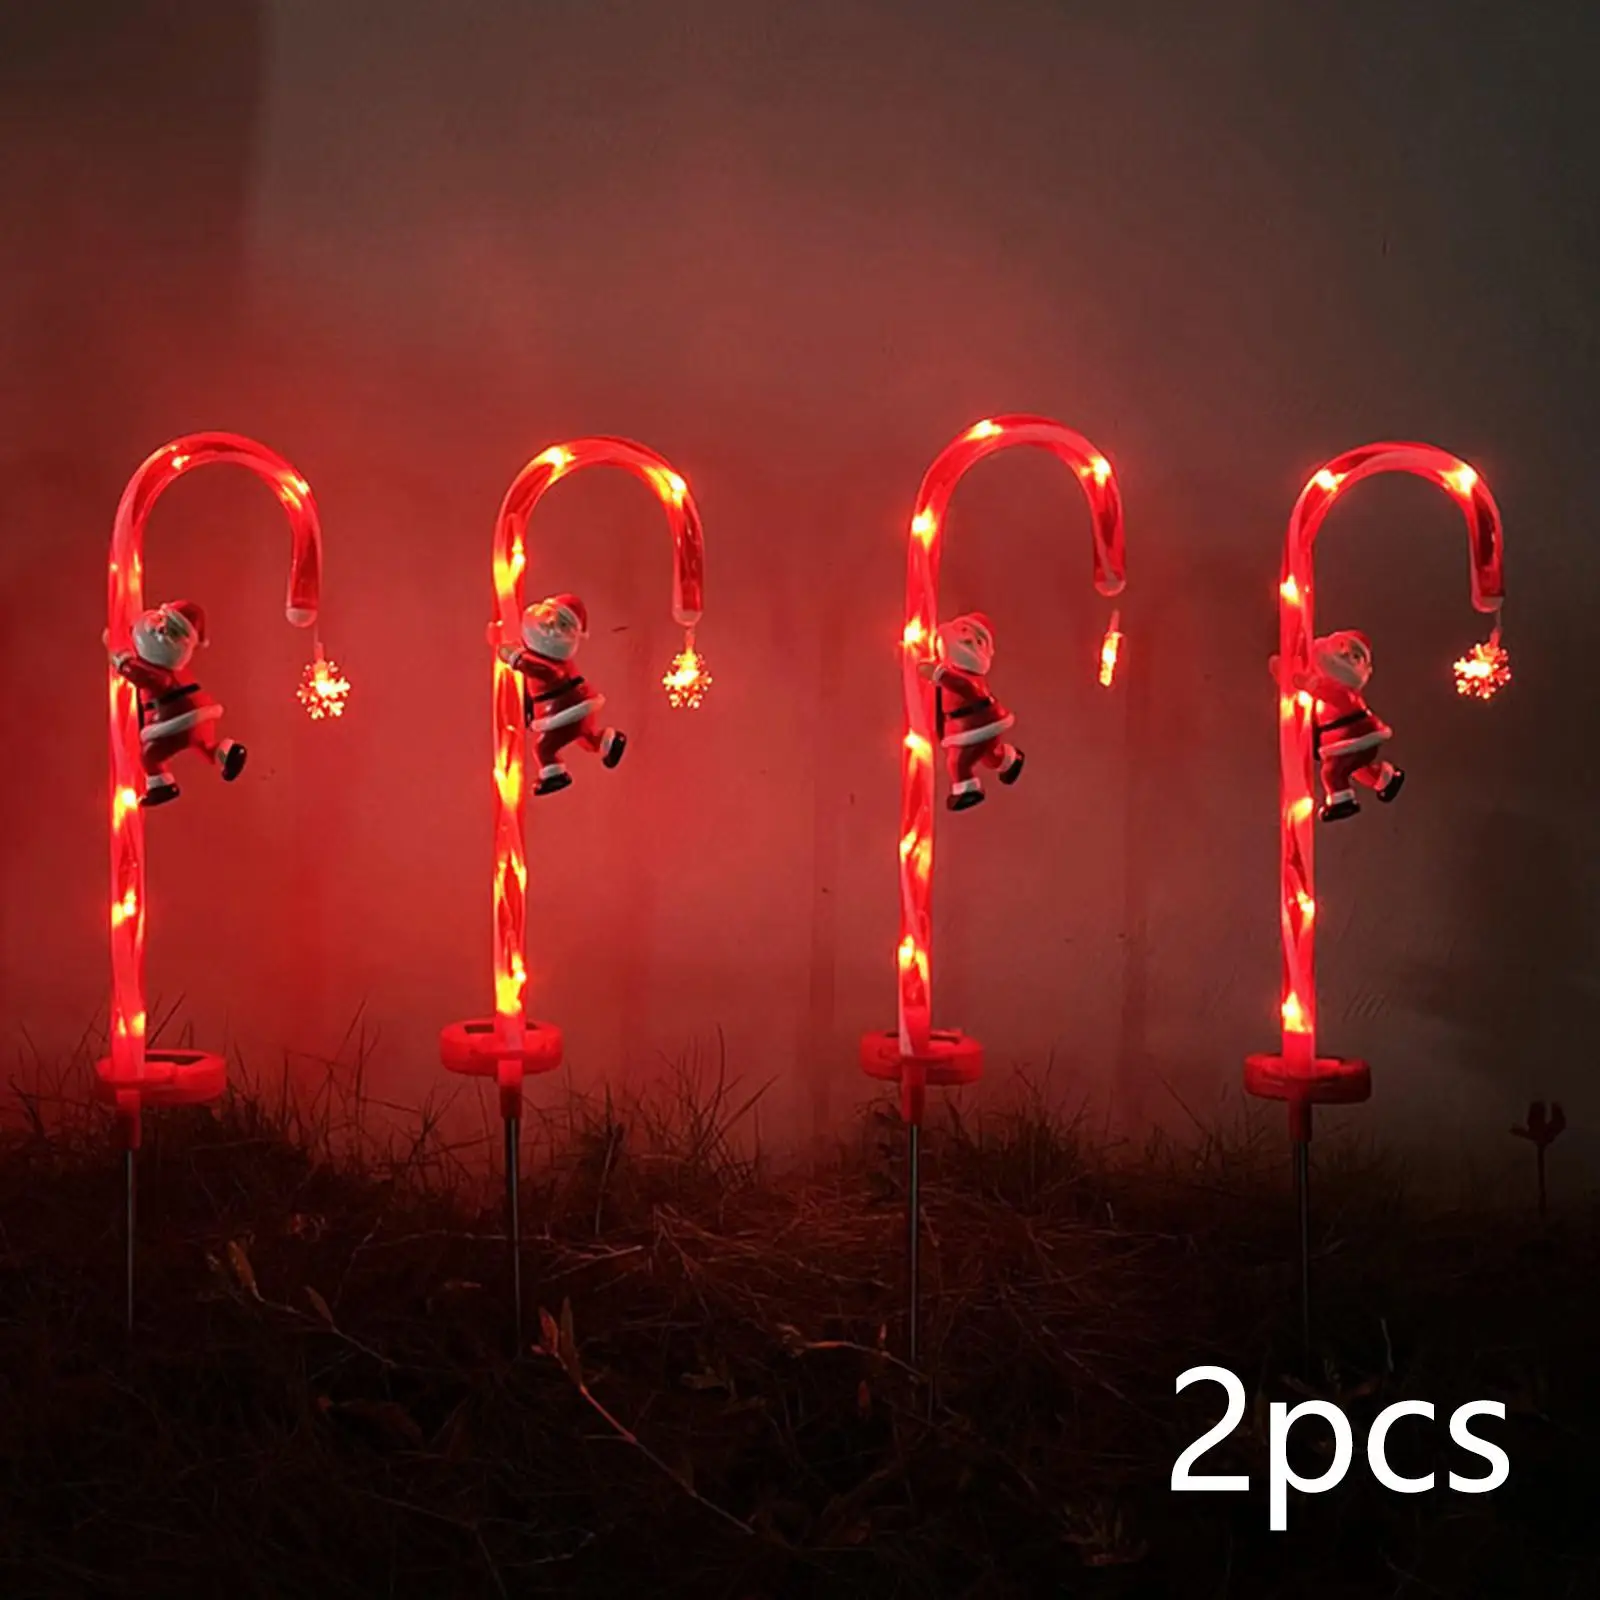 Waterproof Christmas LED Lamps Pathway Markers with Ground Stake Ornaments Candy Cane Solar Lights for Fence Backyard Patio Lawn